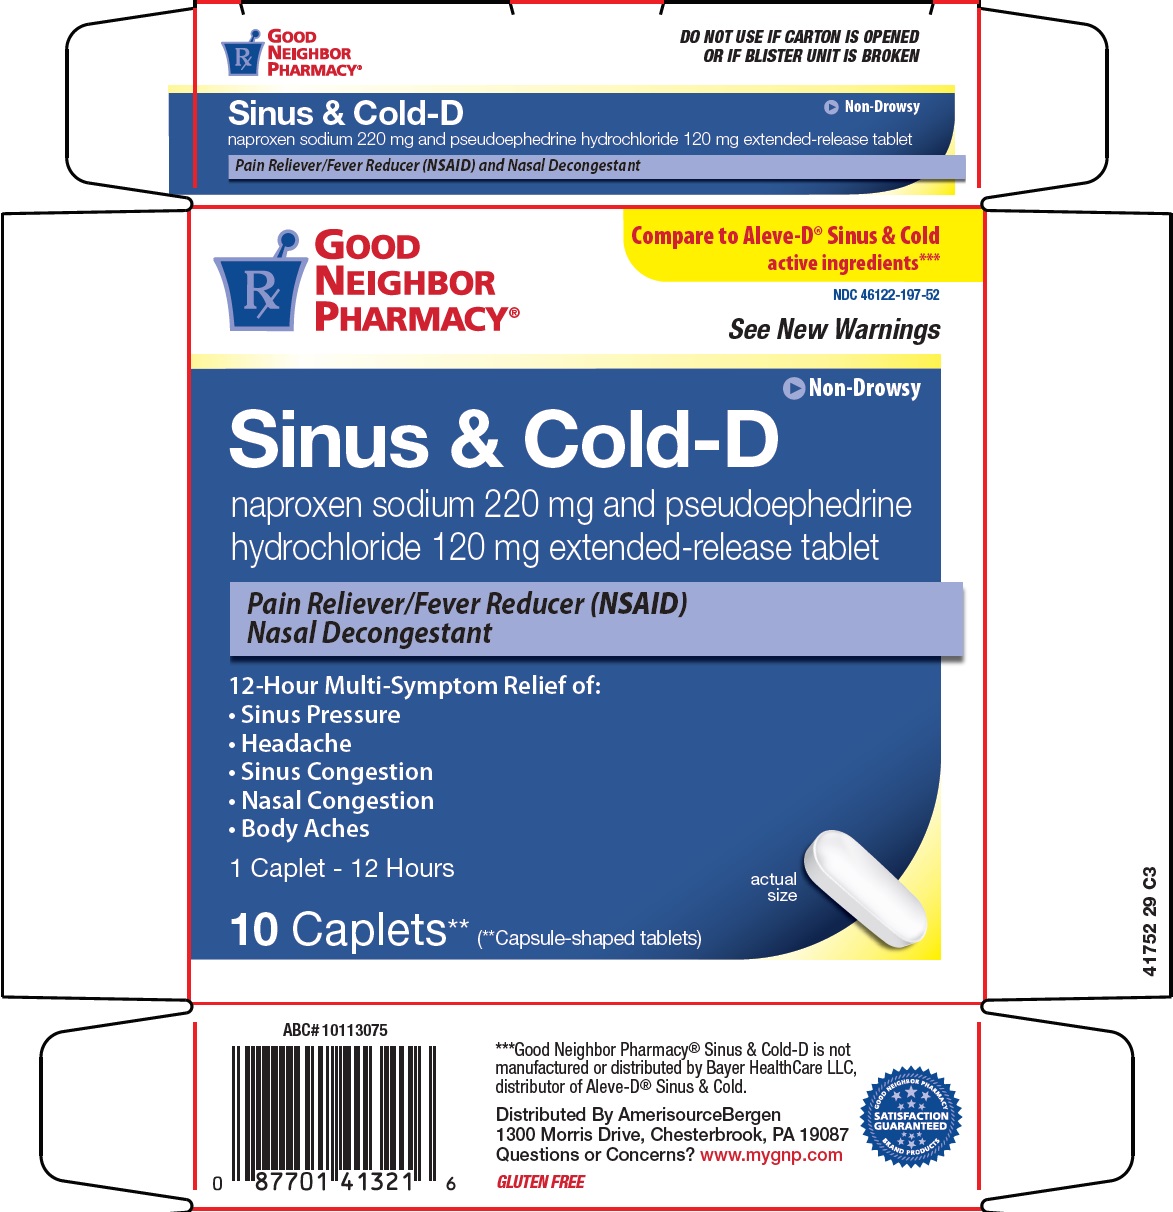 417-29-sinus-and-cold-d.jpg